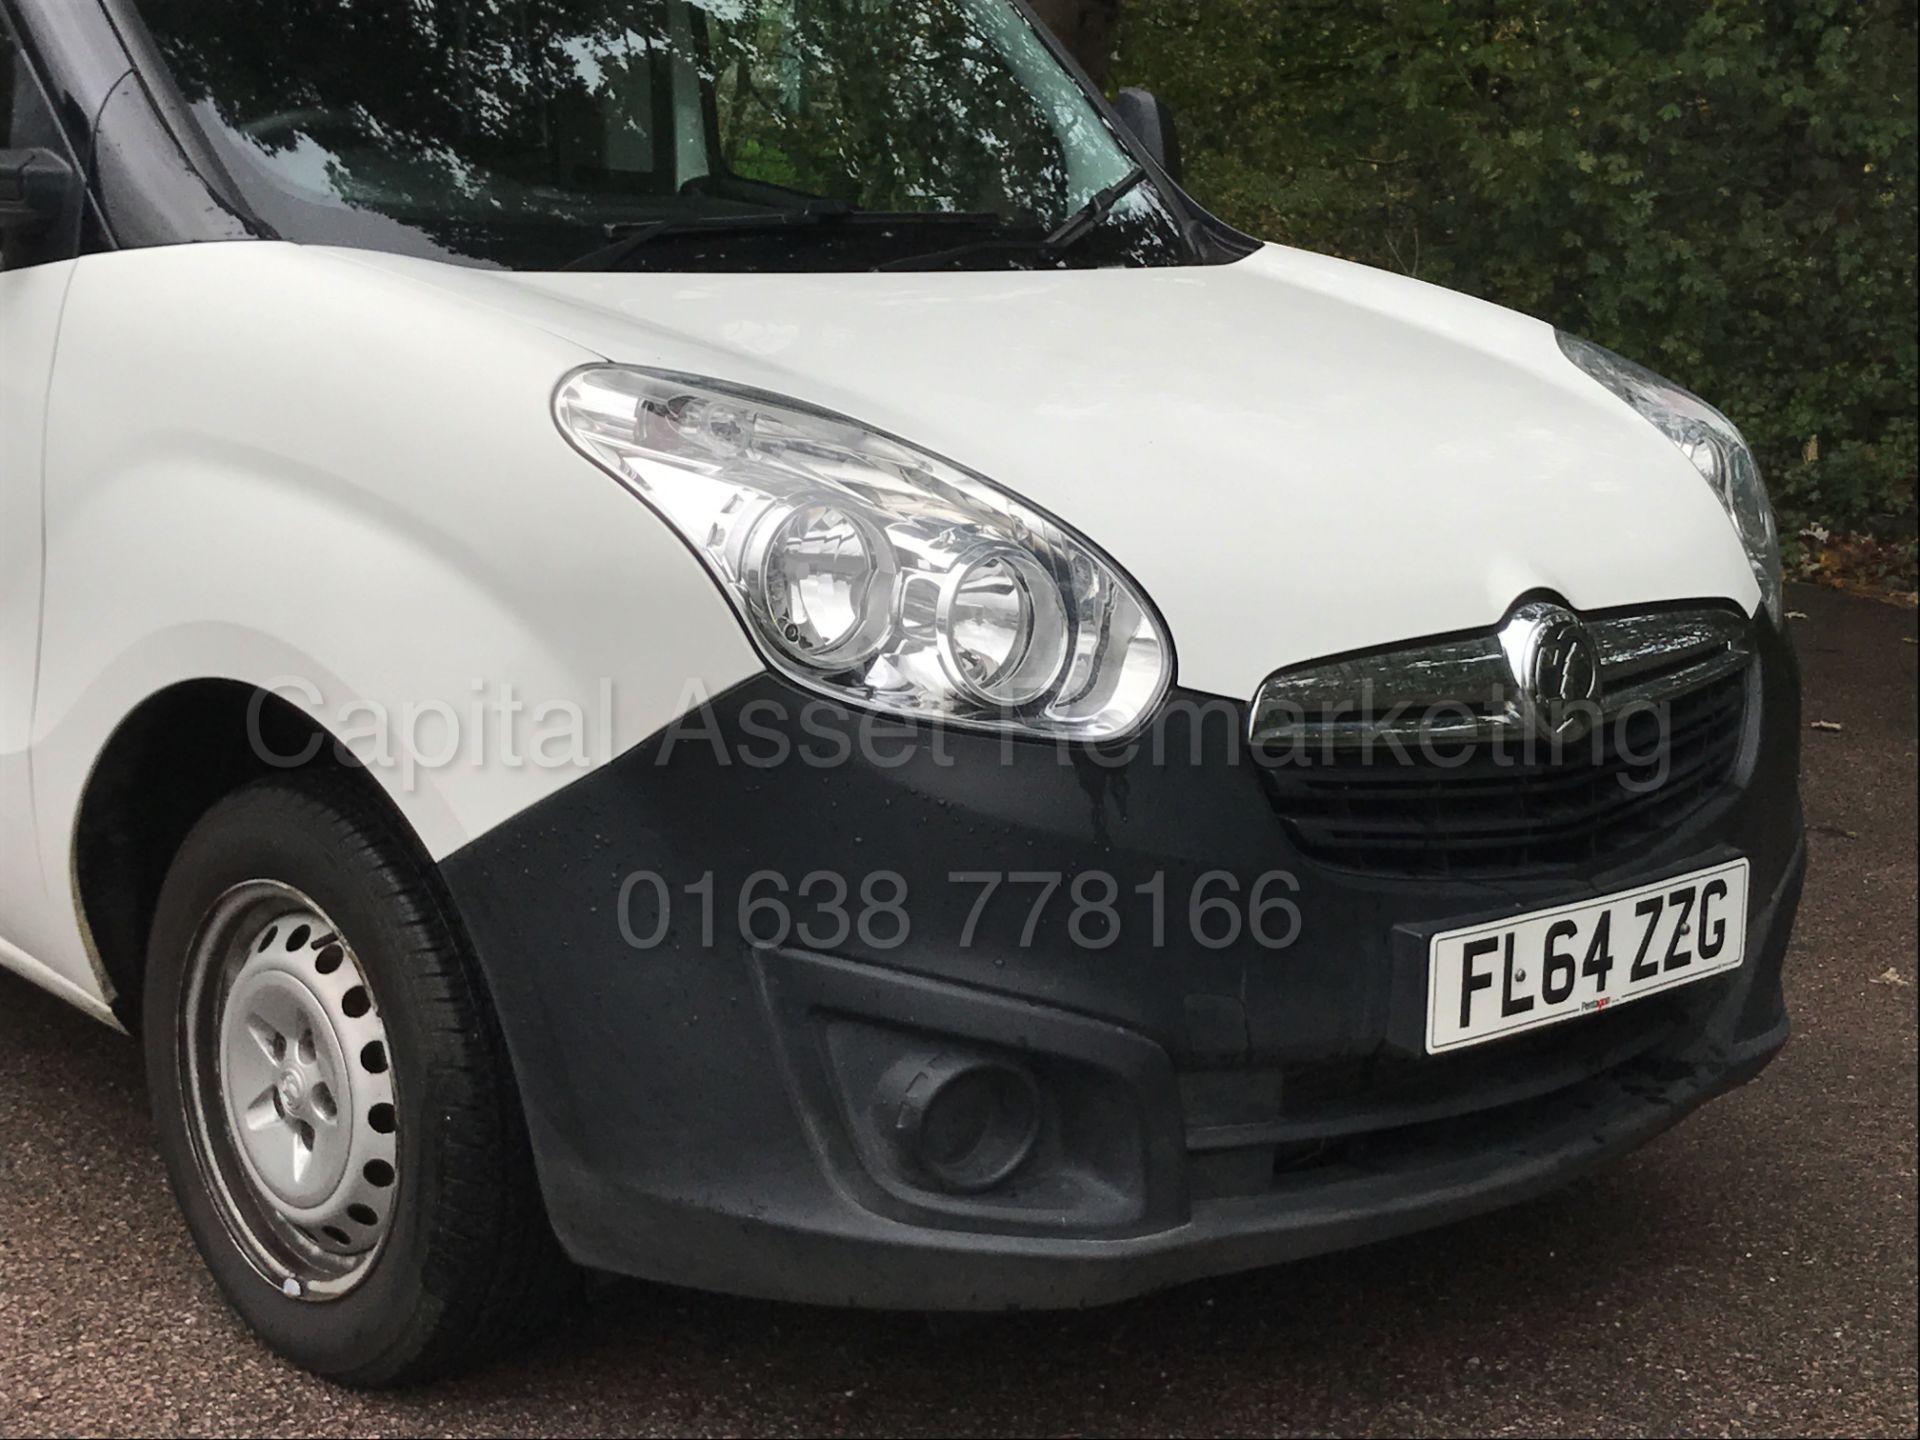 VAUXHALL COMBO 2000 L1H1 (2015 MODEL) 'CDTI - 90 BHP' (1 FORMER COMPANY OWNER FROM NEW) *50 MPG+* - Image 11 of 25